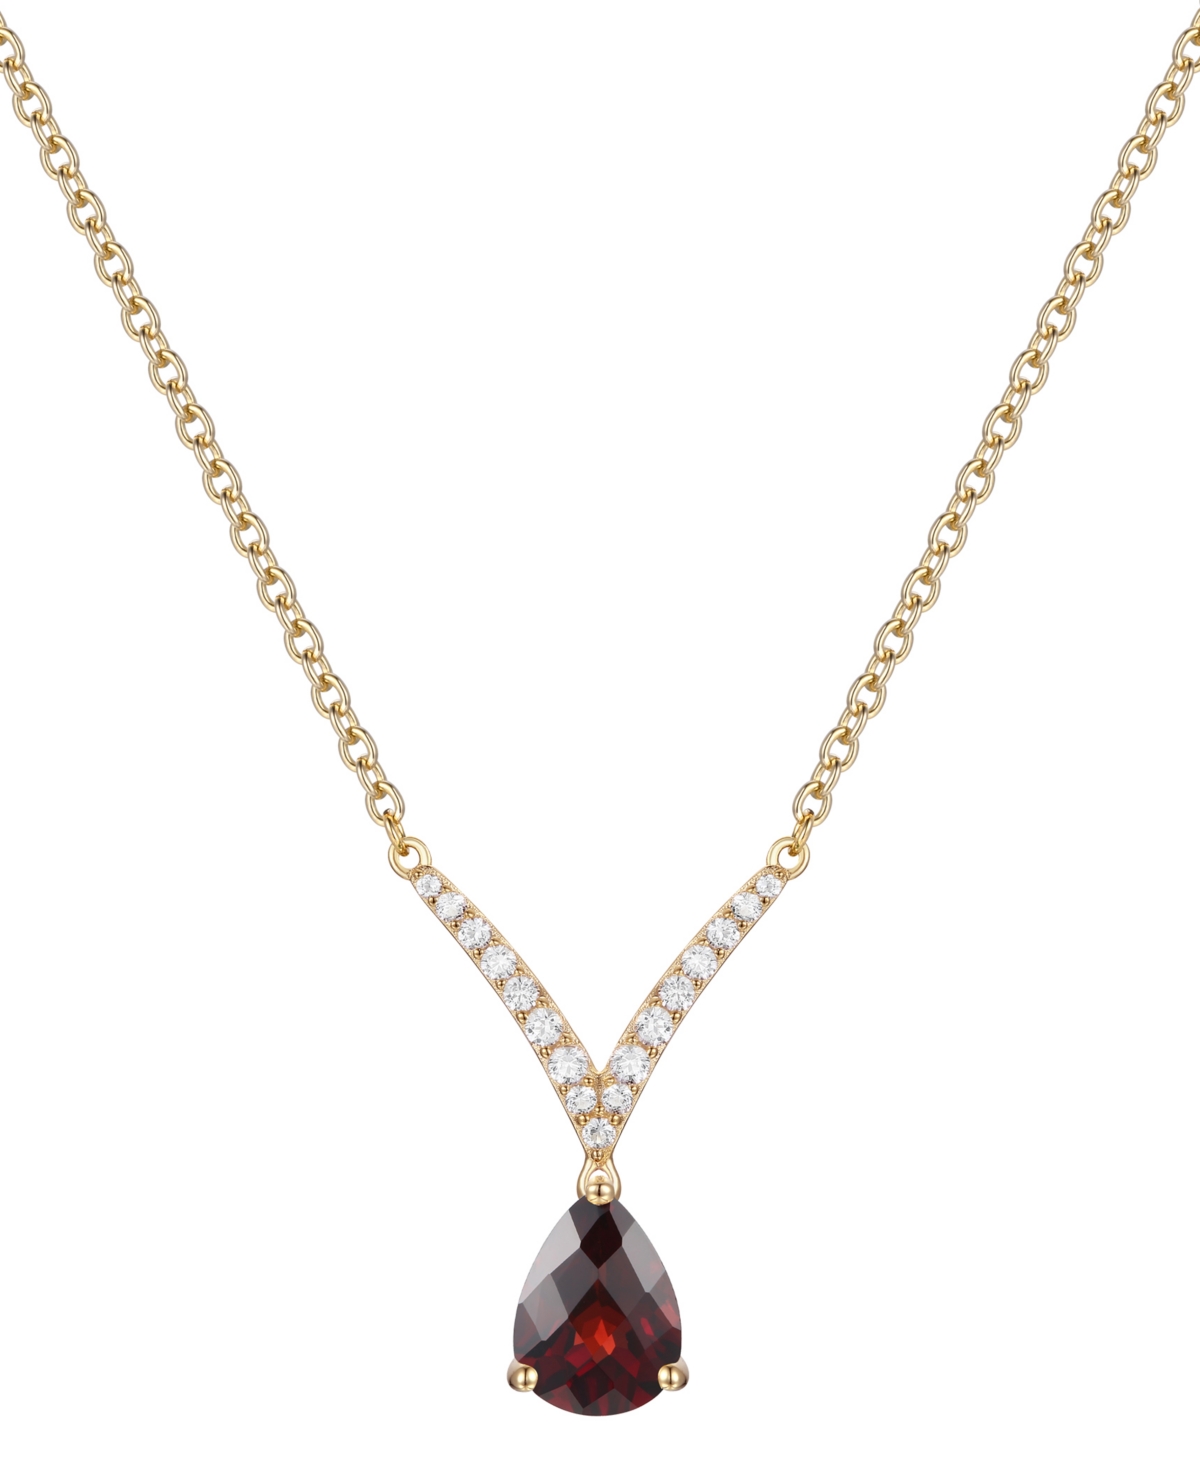 Macy's Amethyst 1ct & 1/6ct Dia Necklace in 14k Gold